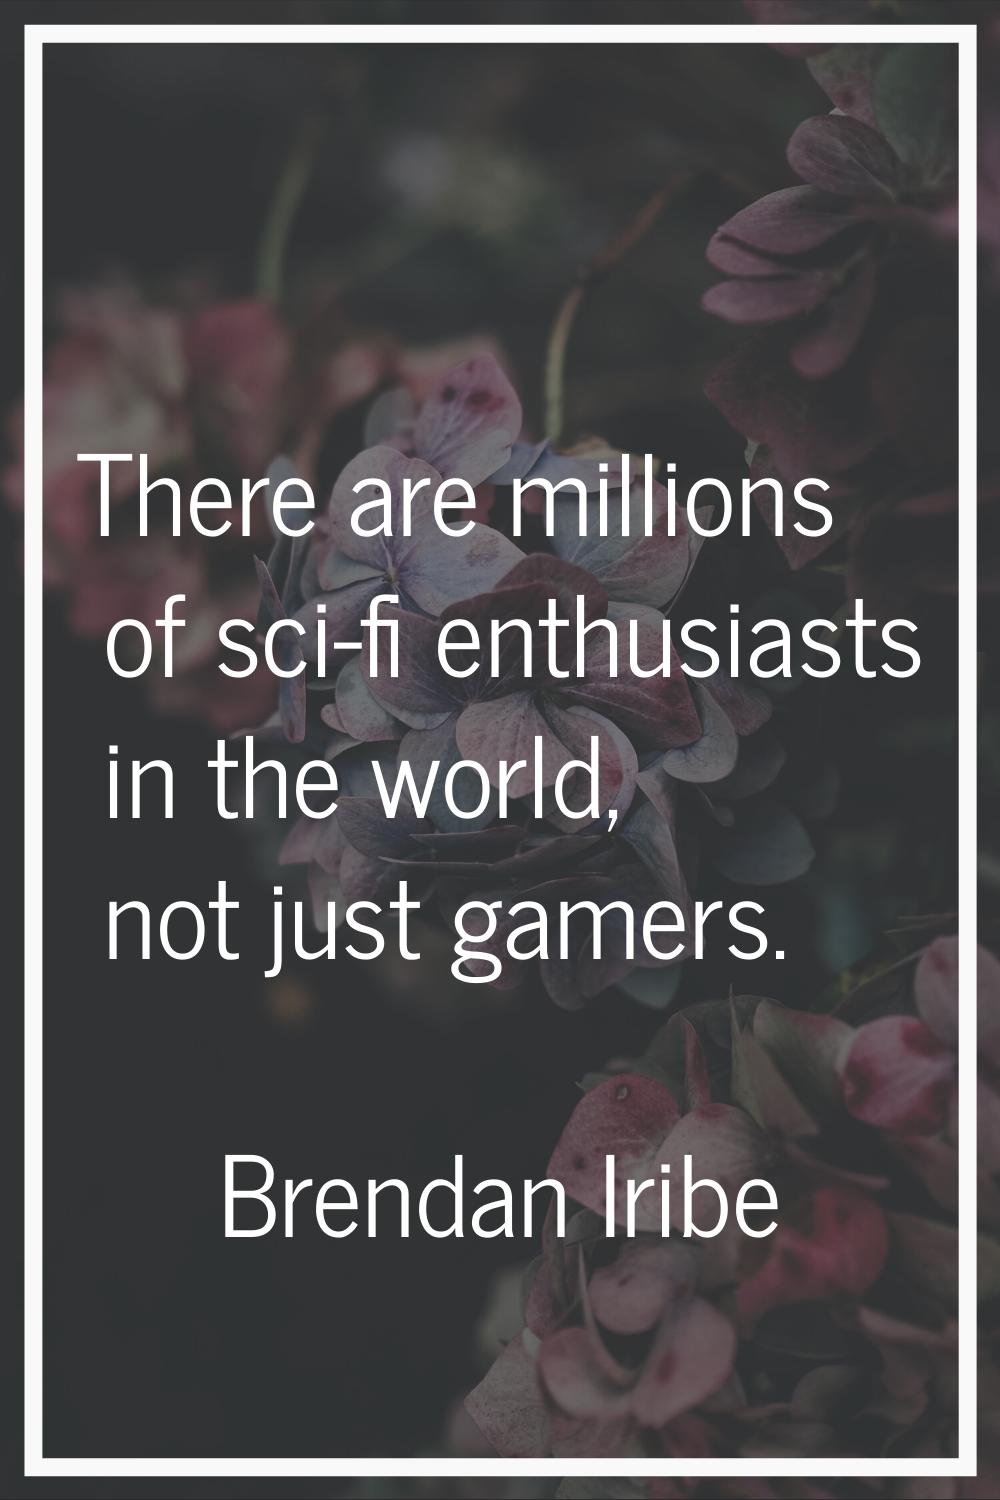 There are millions of sci-fi enthusiasts in the world, not just gamers.